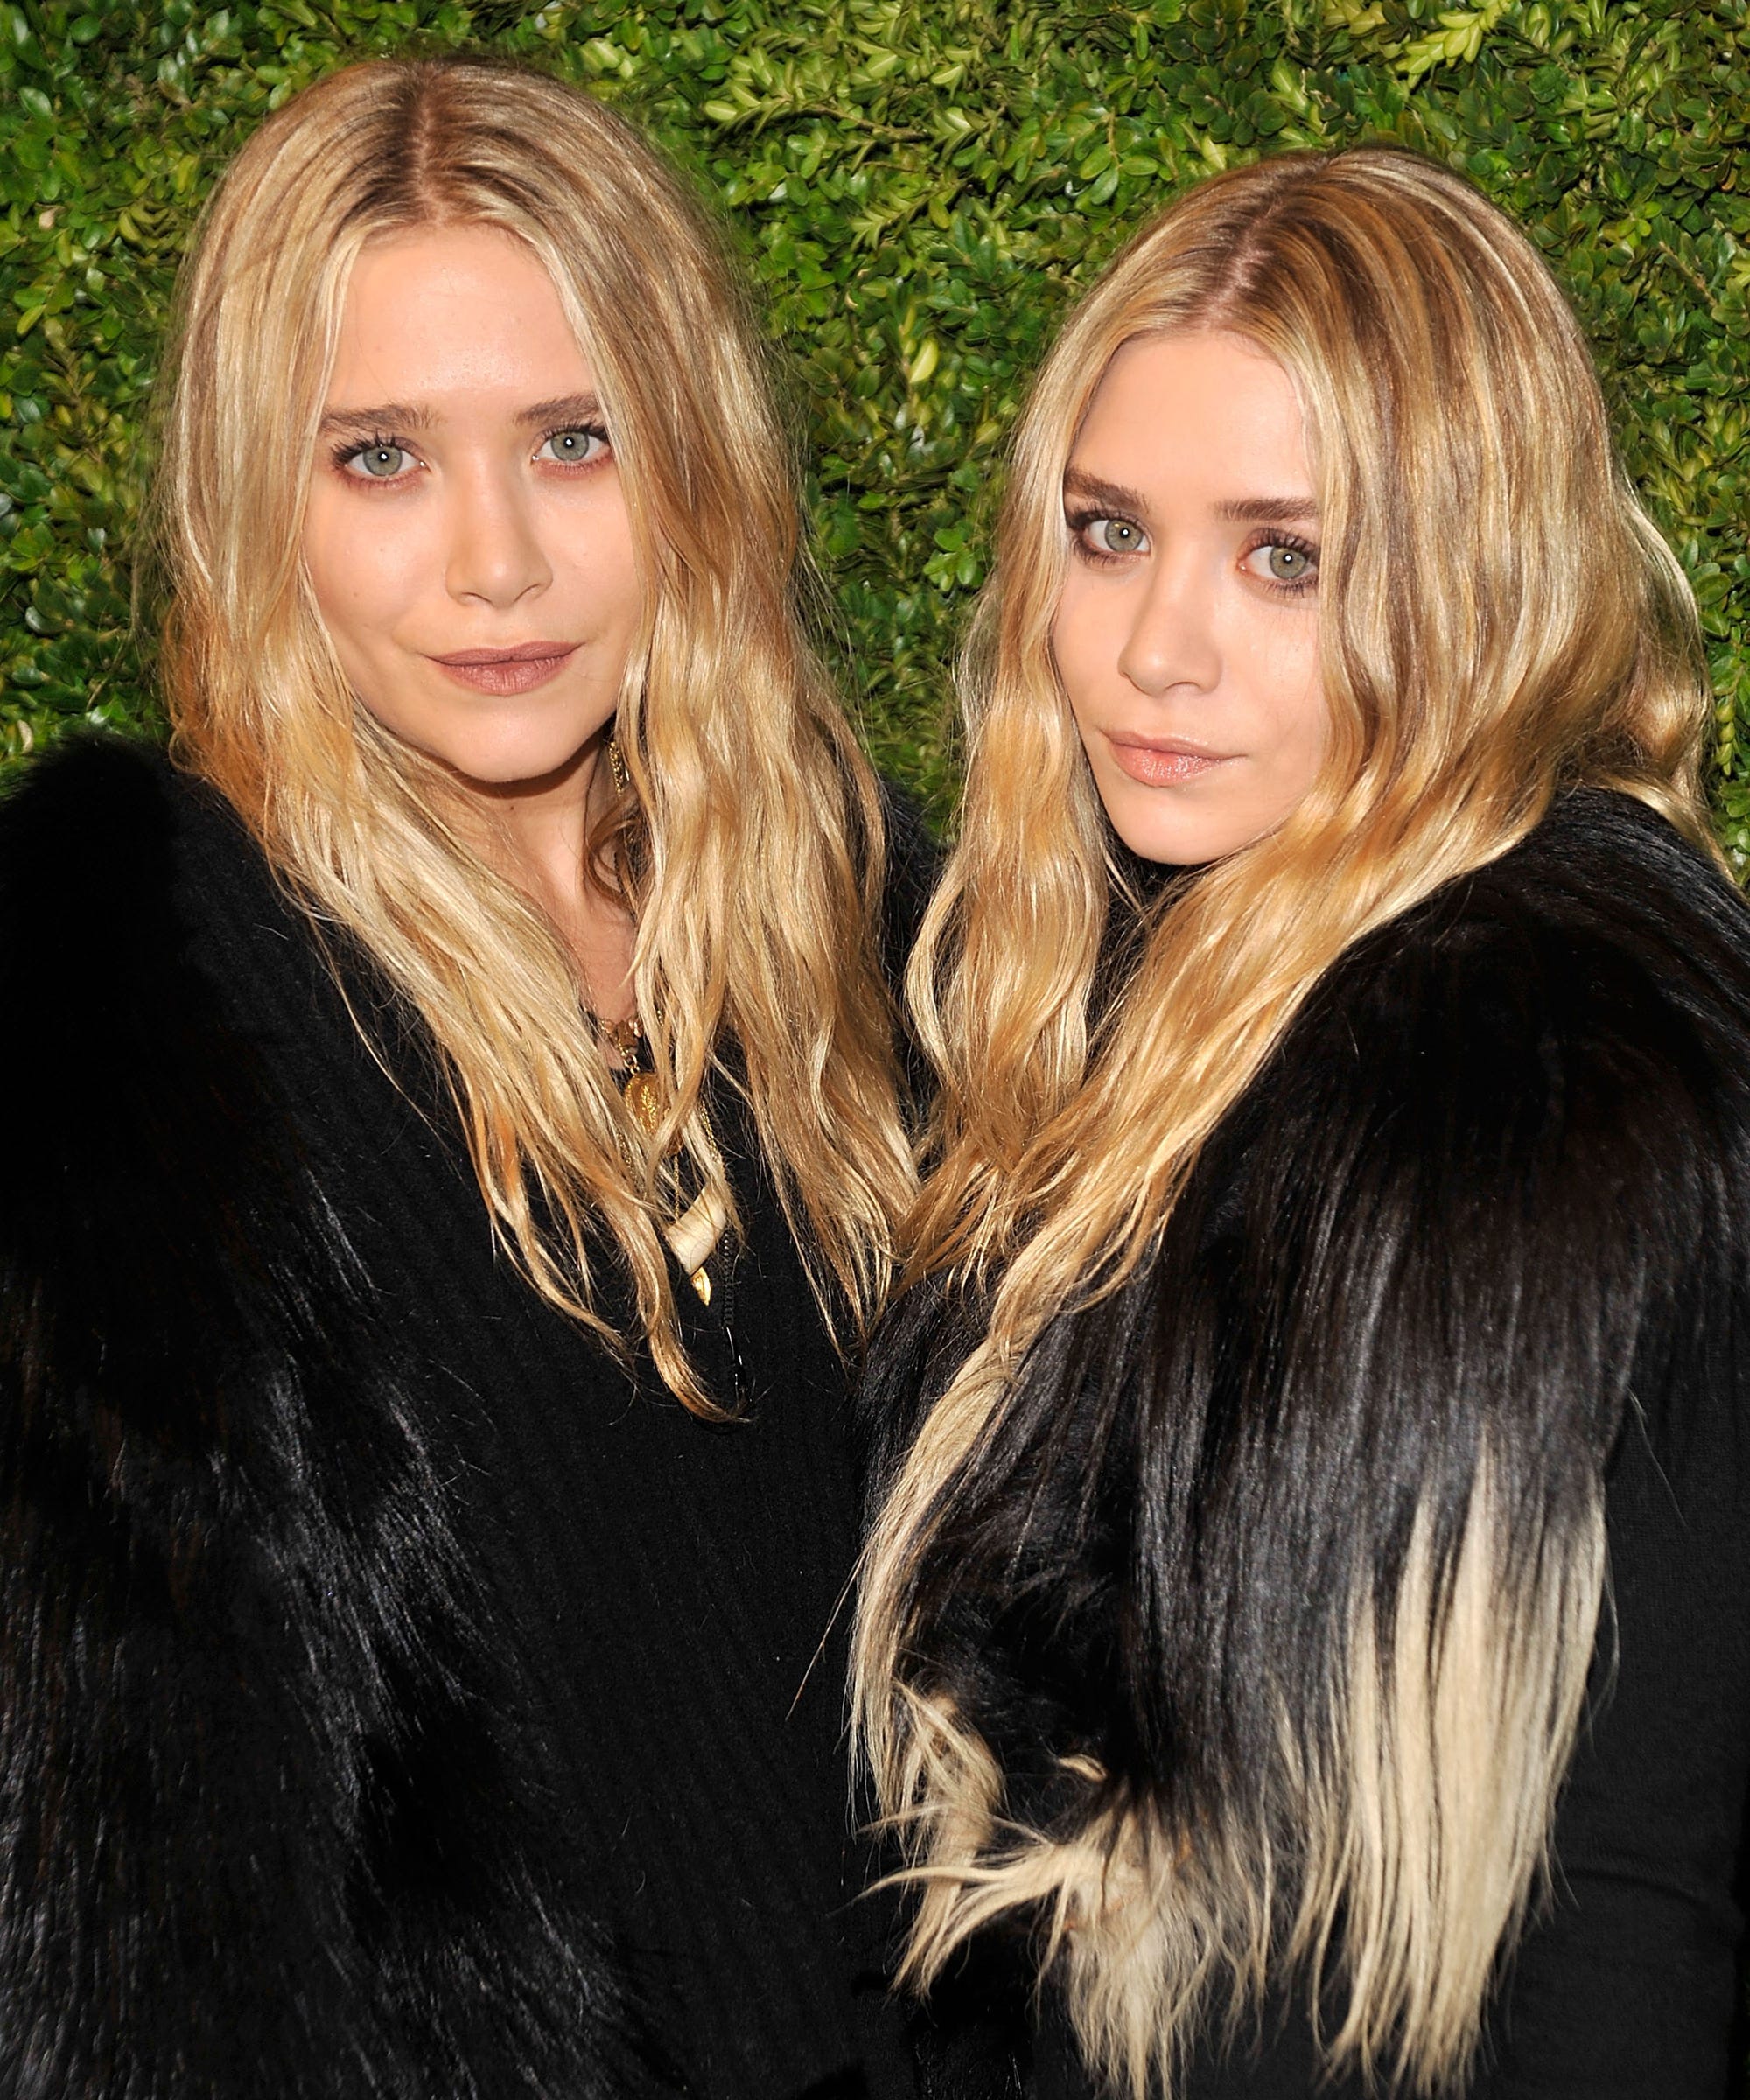 anne culhane recommends Nude Pictures Of Mary Kate And Ashley Olsen